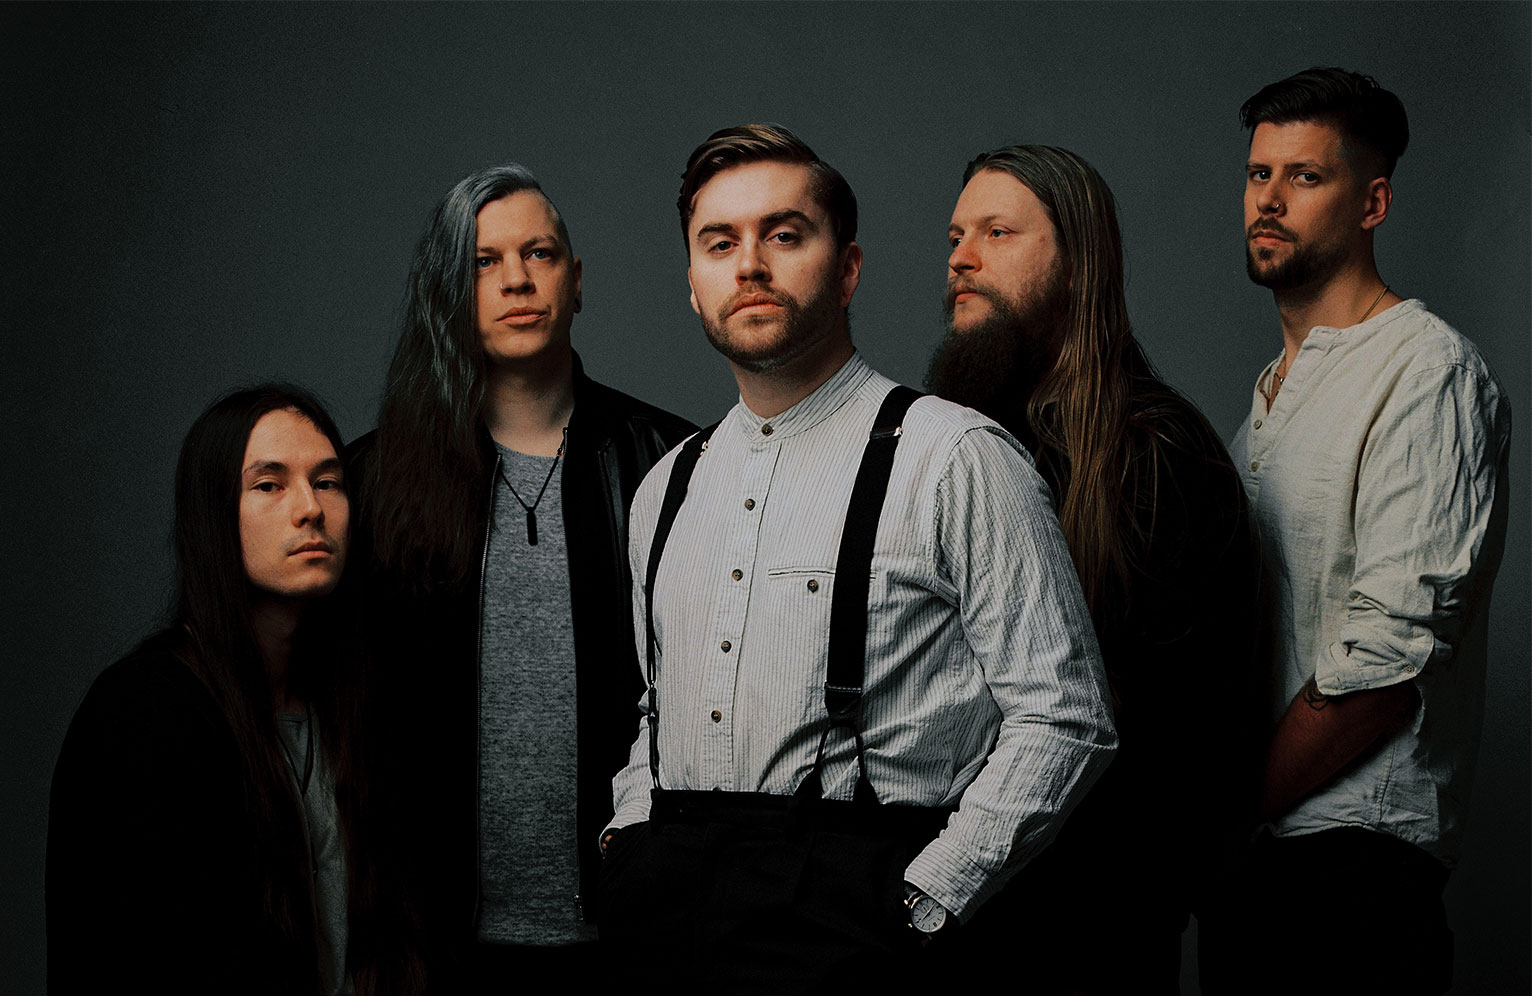 Swedish Metalcore Reigns with IMMINENCE’s New Single ‘Heaven Shall Burn’